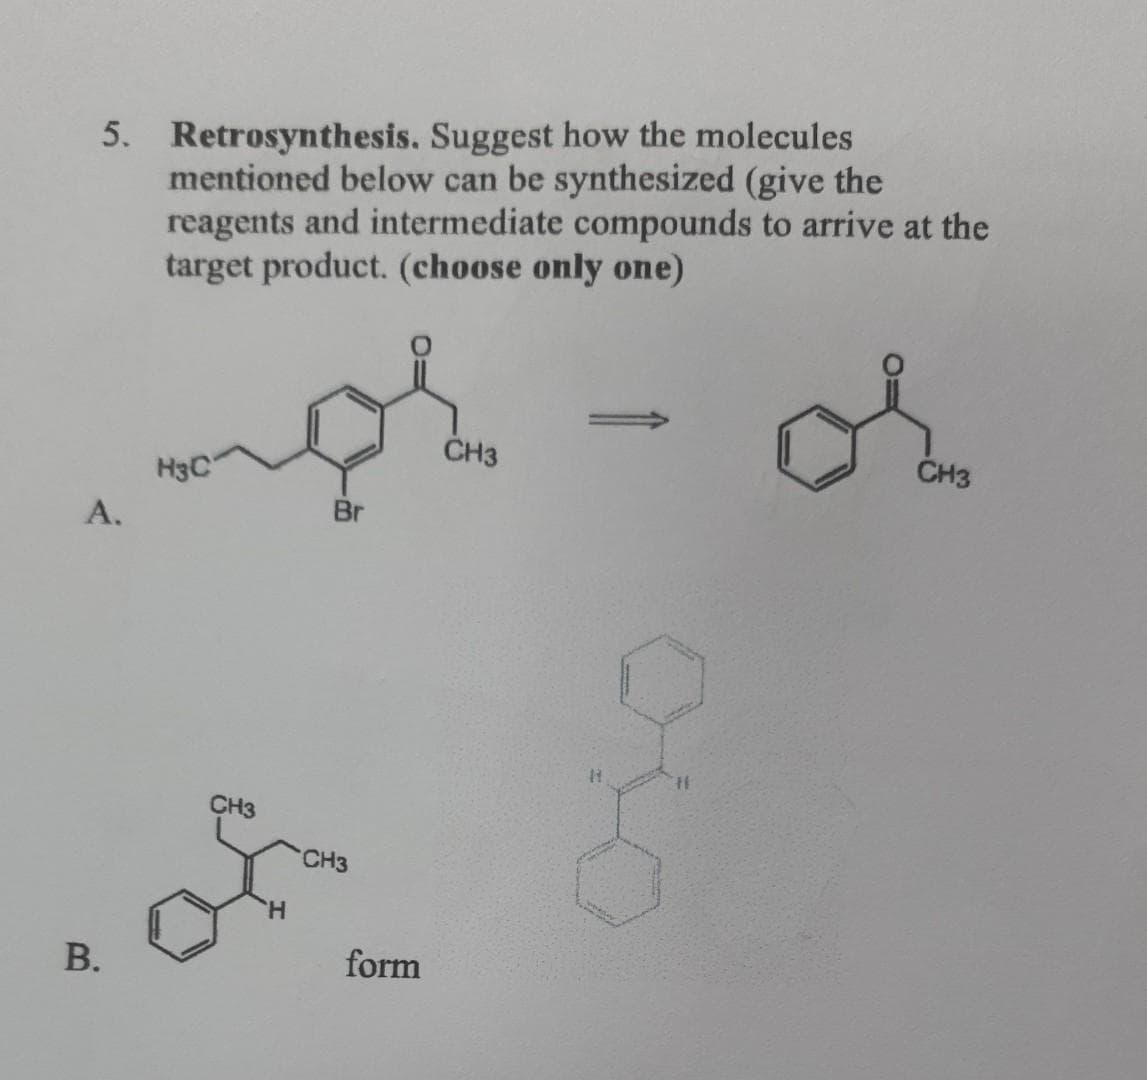 5. Retrosynthesis. Suggest how the molecules
mentioned below can be synthesized (give the
reagents and intermediate compounds to arrive at the
target product. (choose only one)
CH3
CH3
H3C
Br
A.
B.
CH3
'H
CH3
form